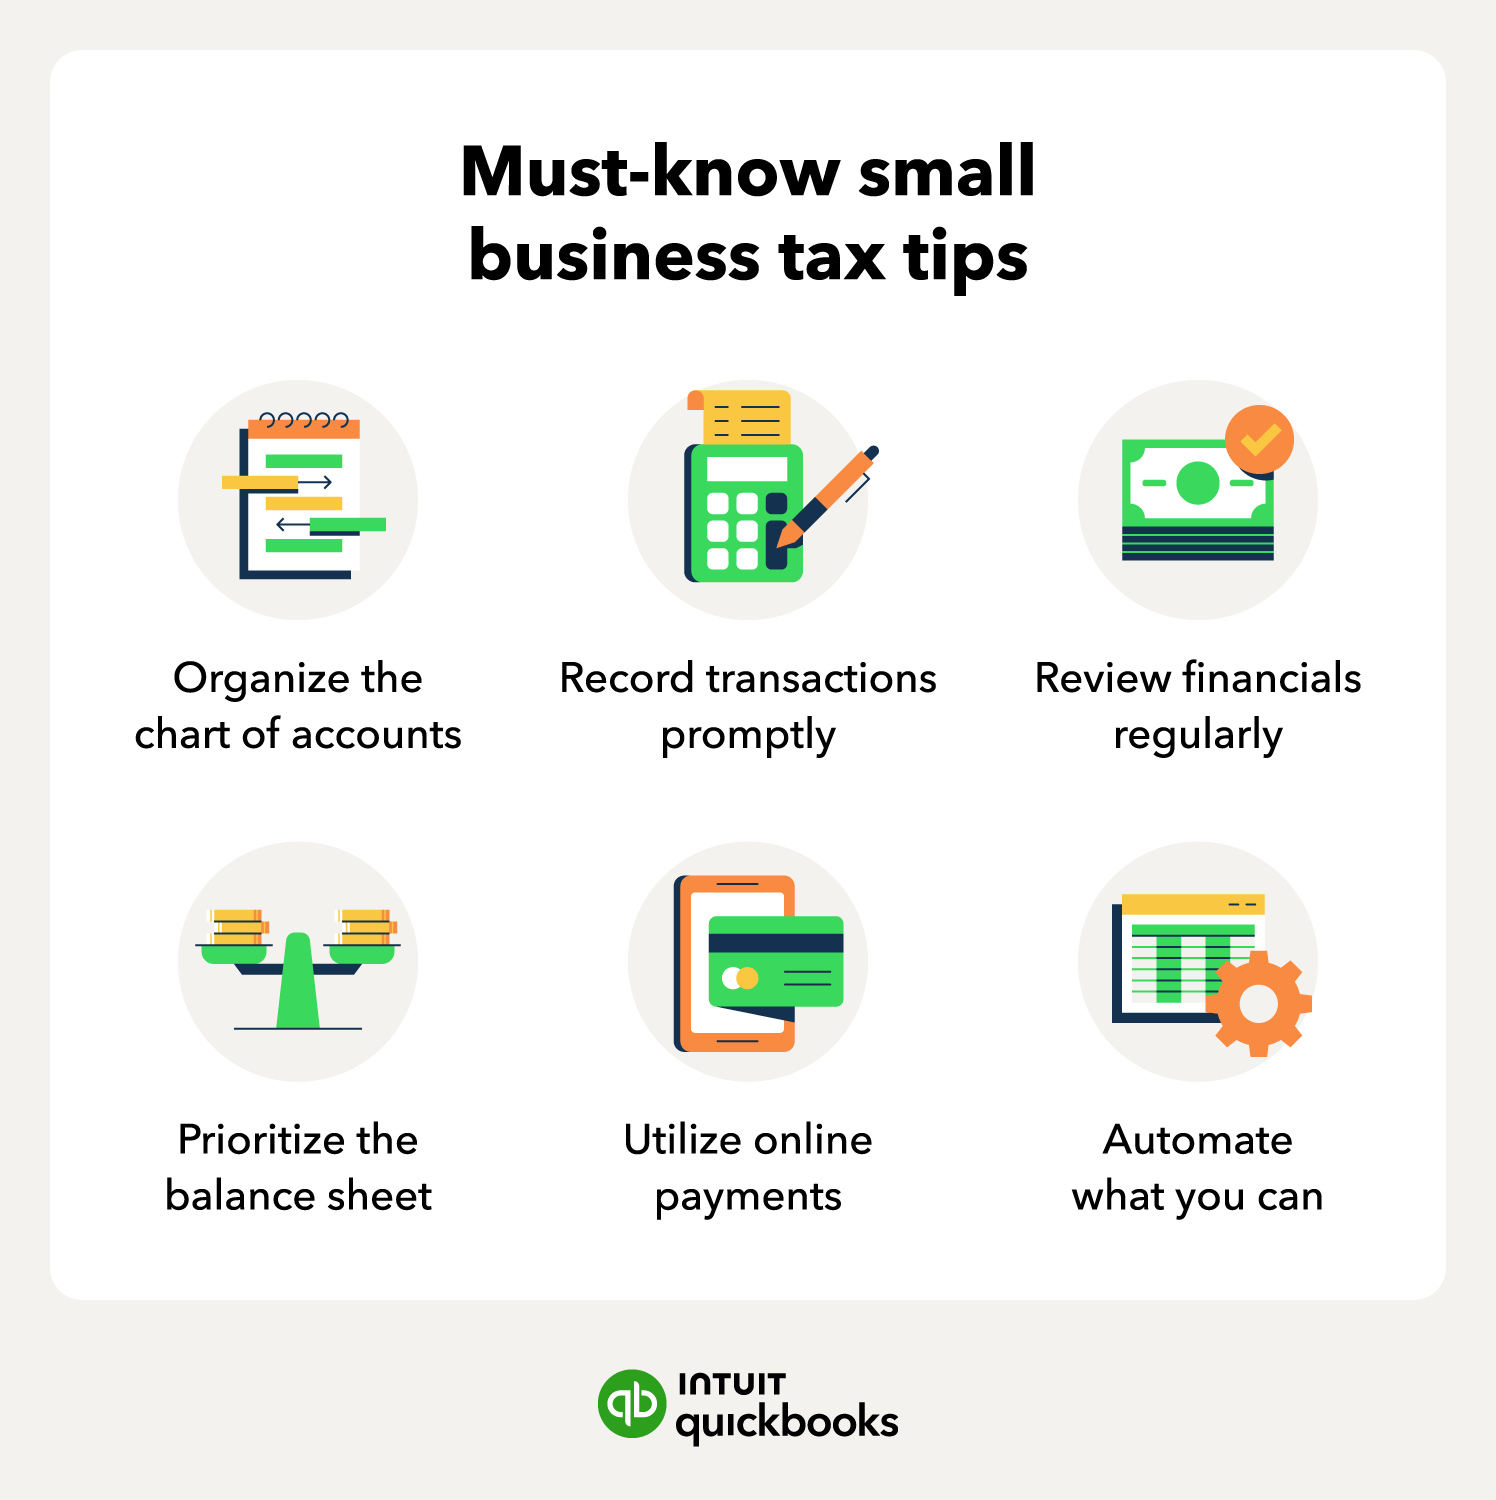 An illustration of the must-know small business tax tips.